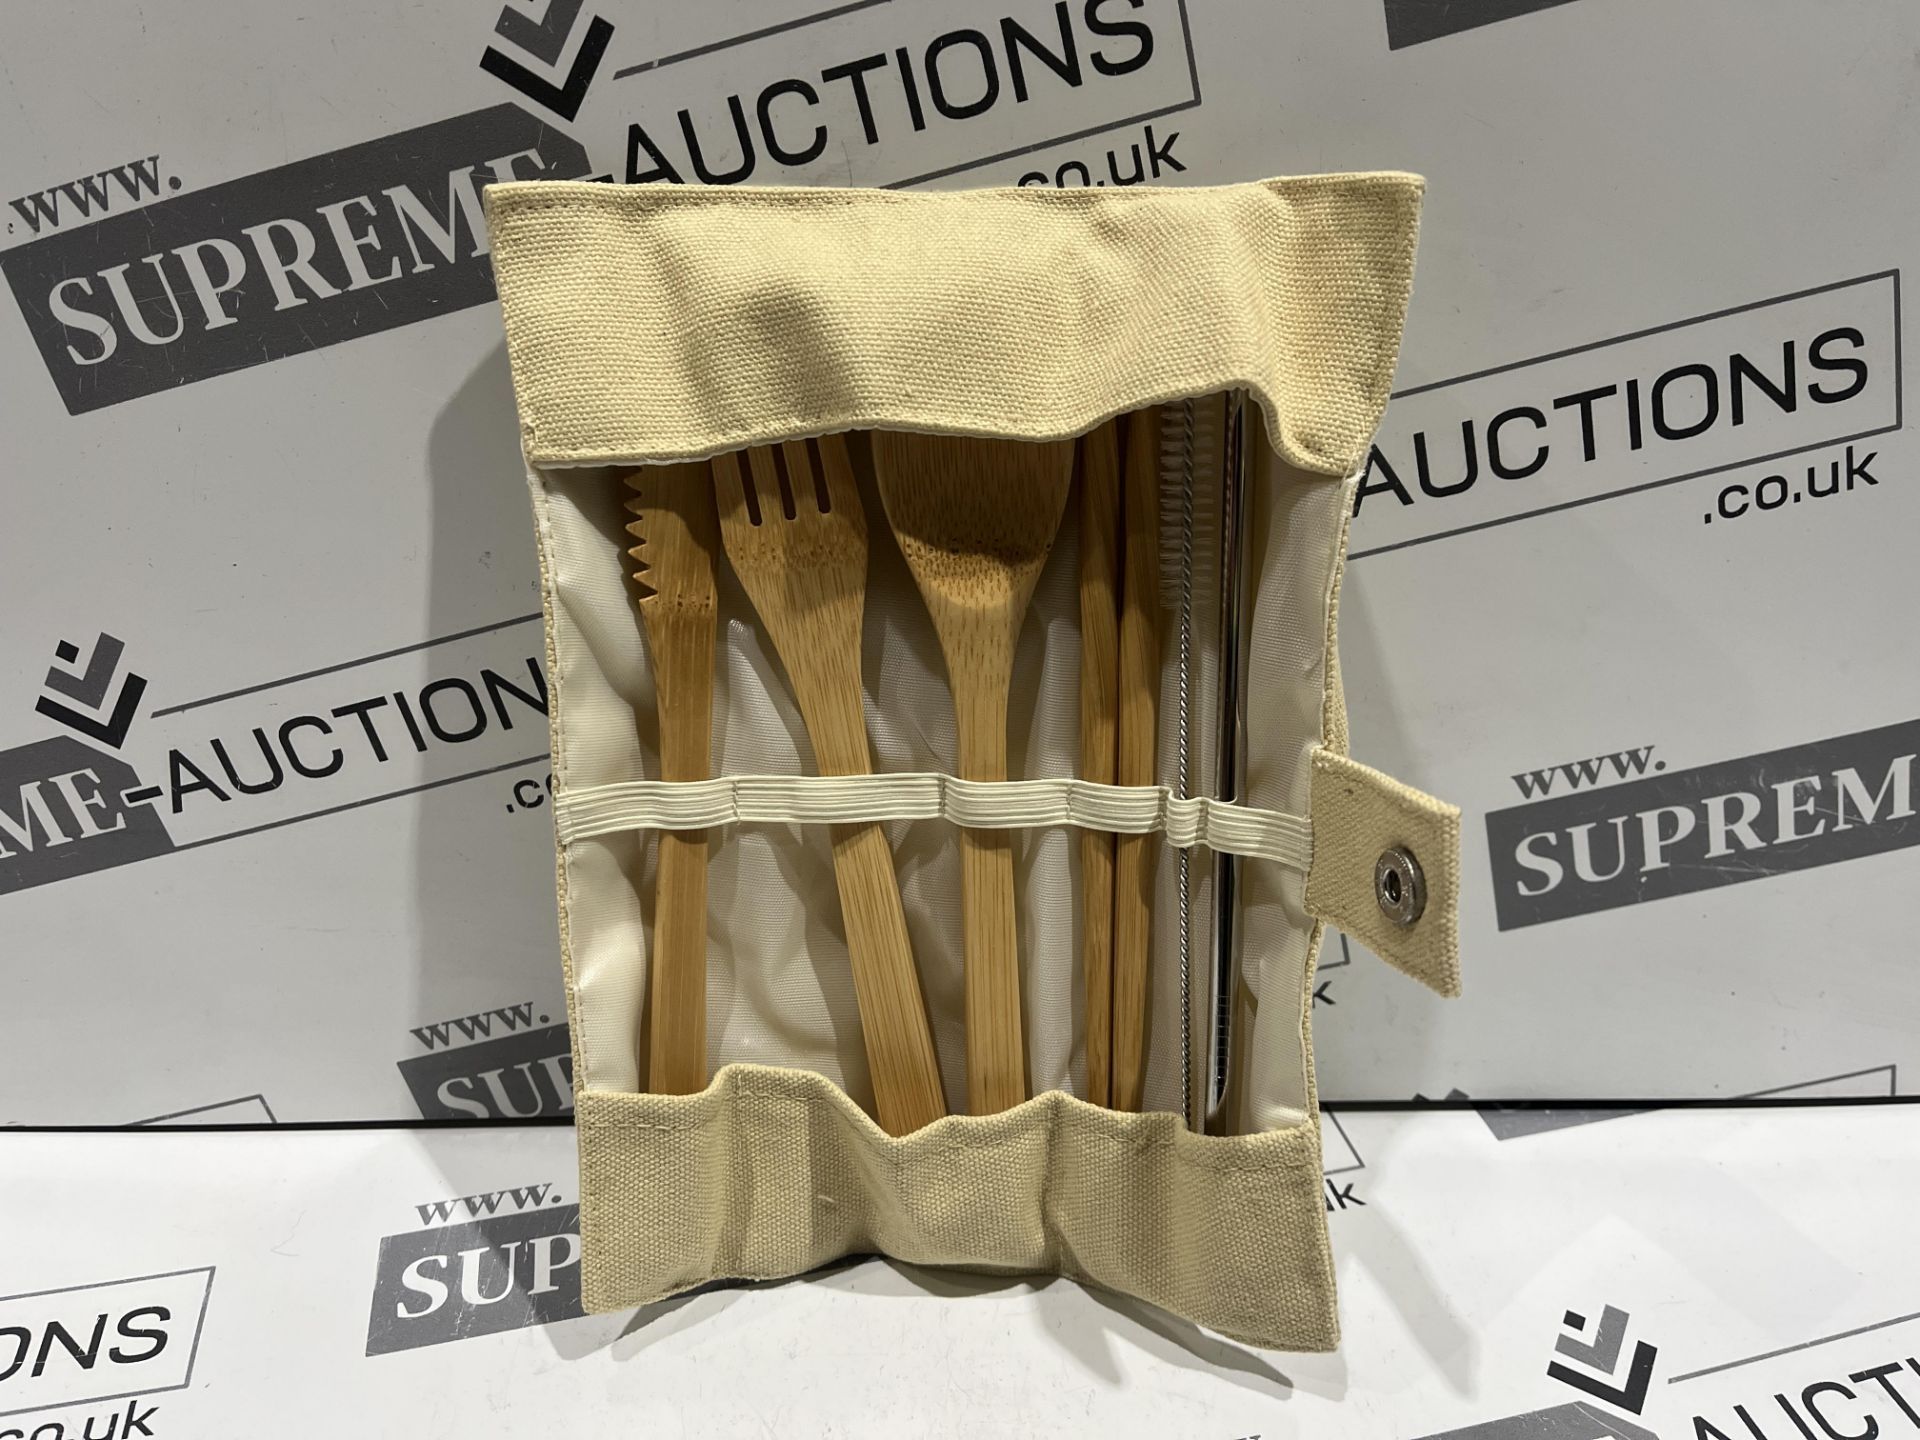 25 X BRAND NEW WAKECUP WOODEN CUTLERY AND CLEANING KITS R9B-6